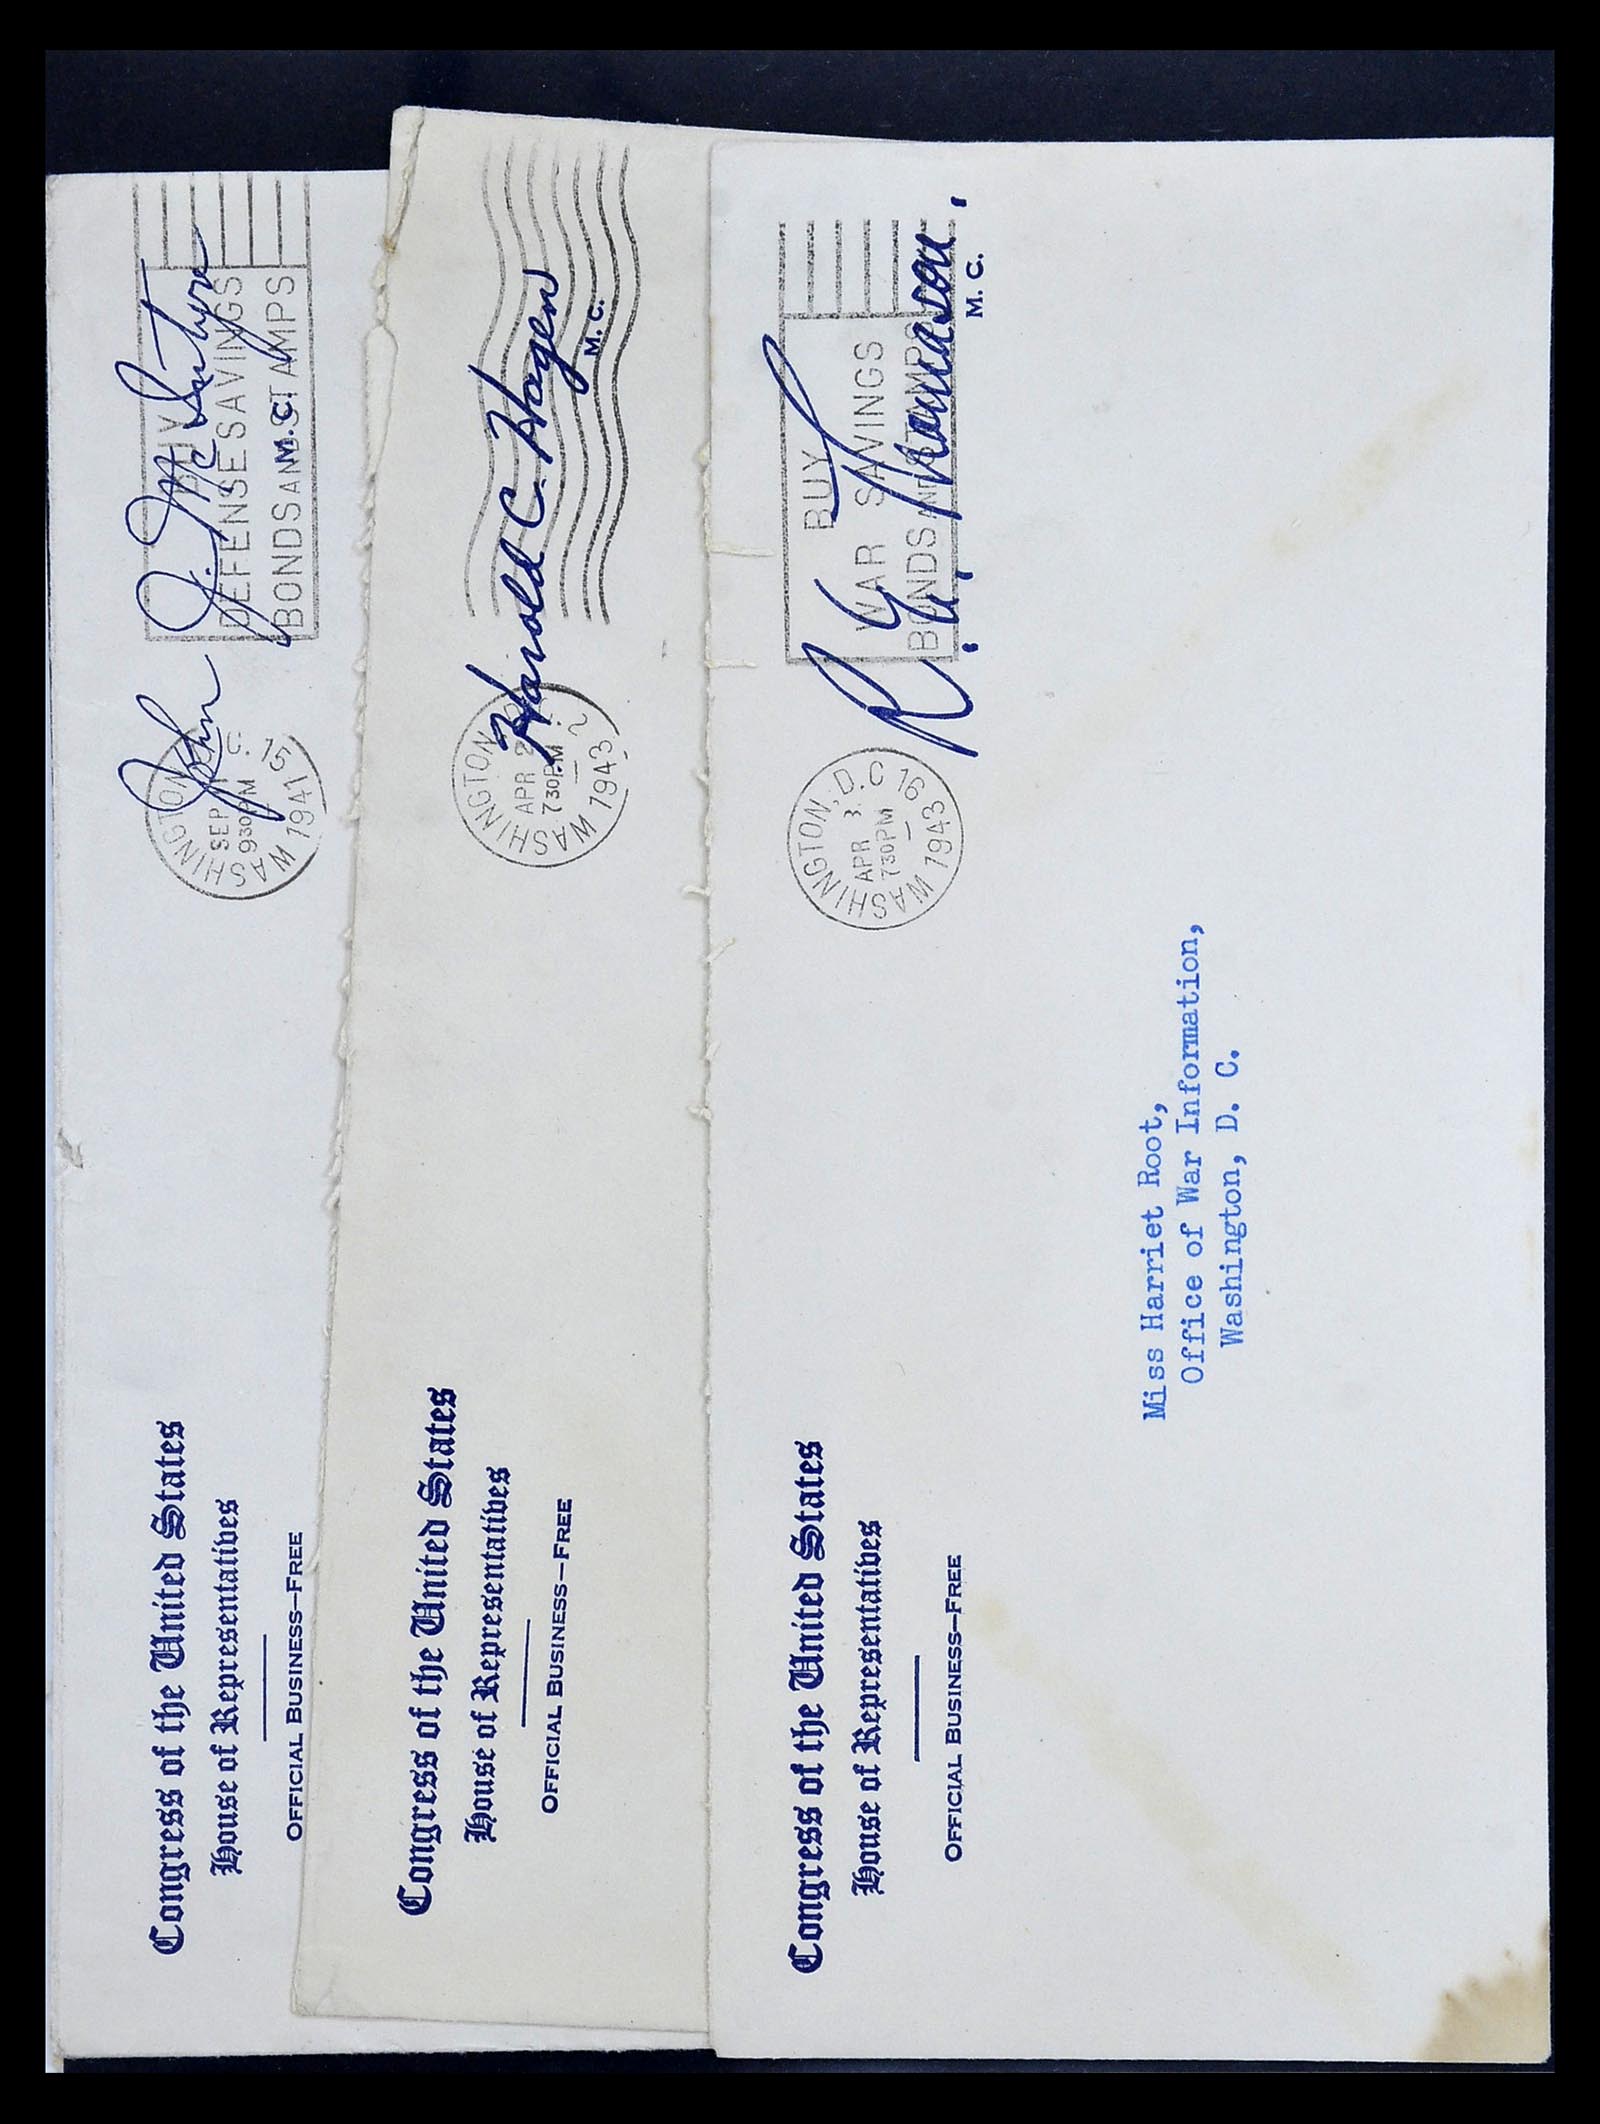 34801 092 - Stamp Collection 34801 USA service covers 1840-2000.